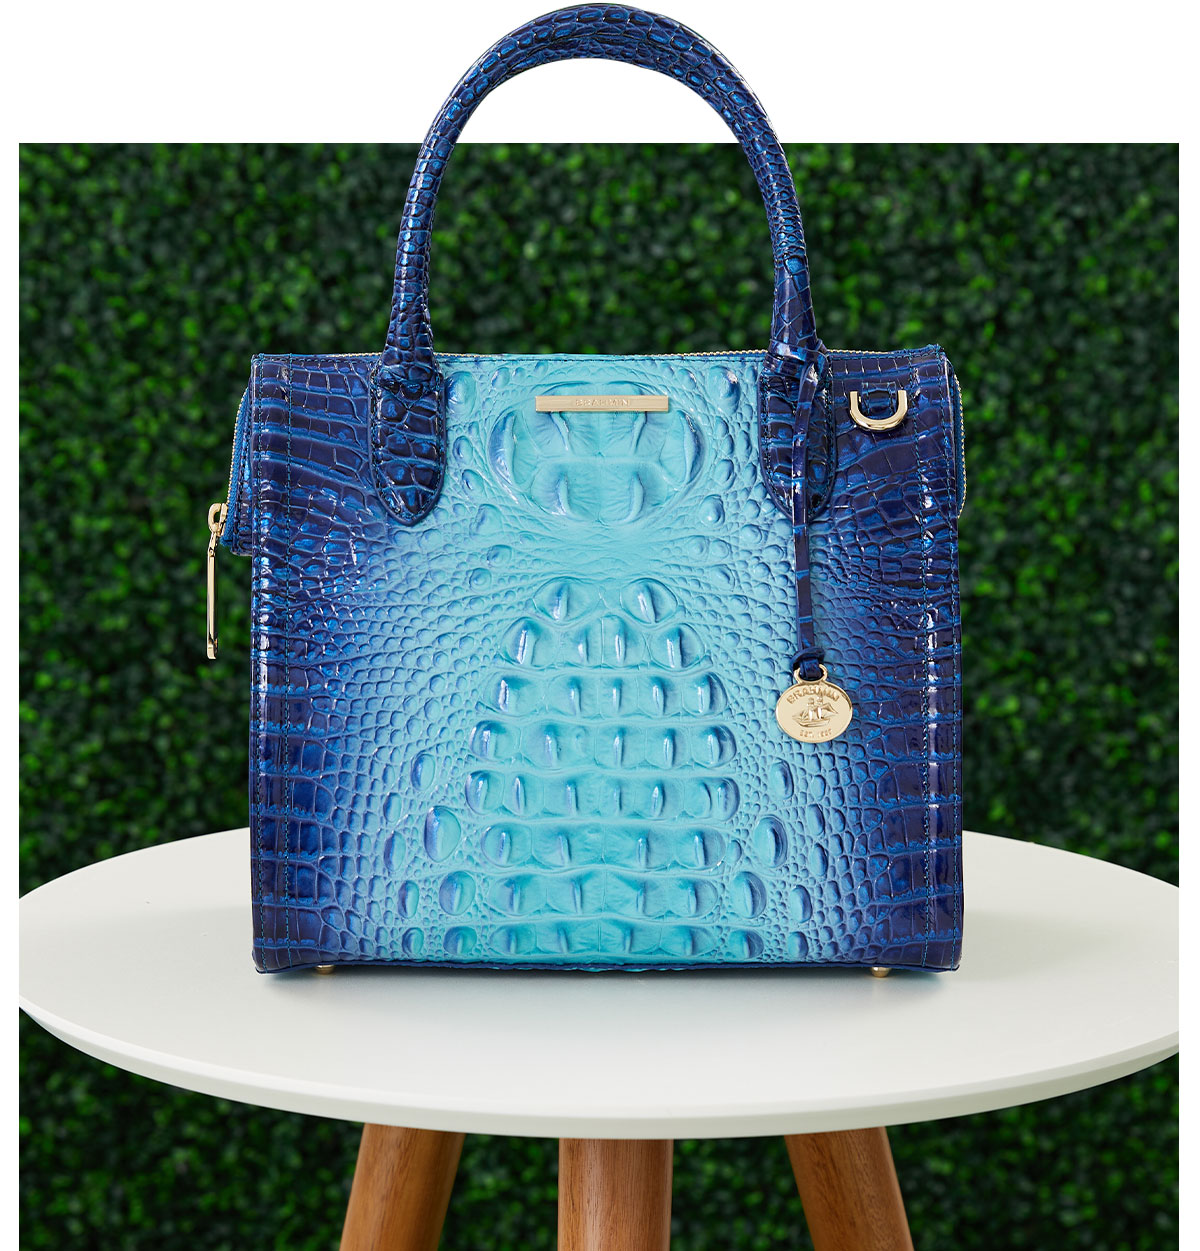 Brahmin Handbags in a Department Store Editorial Photo - Image of